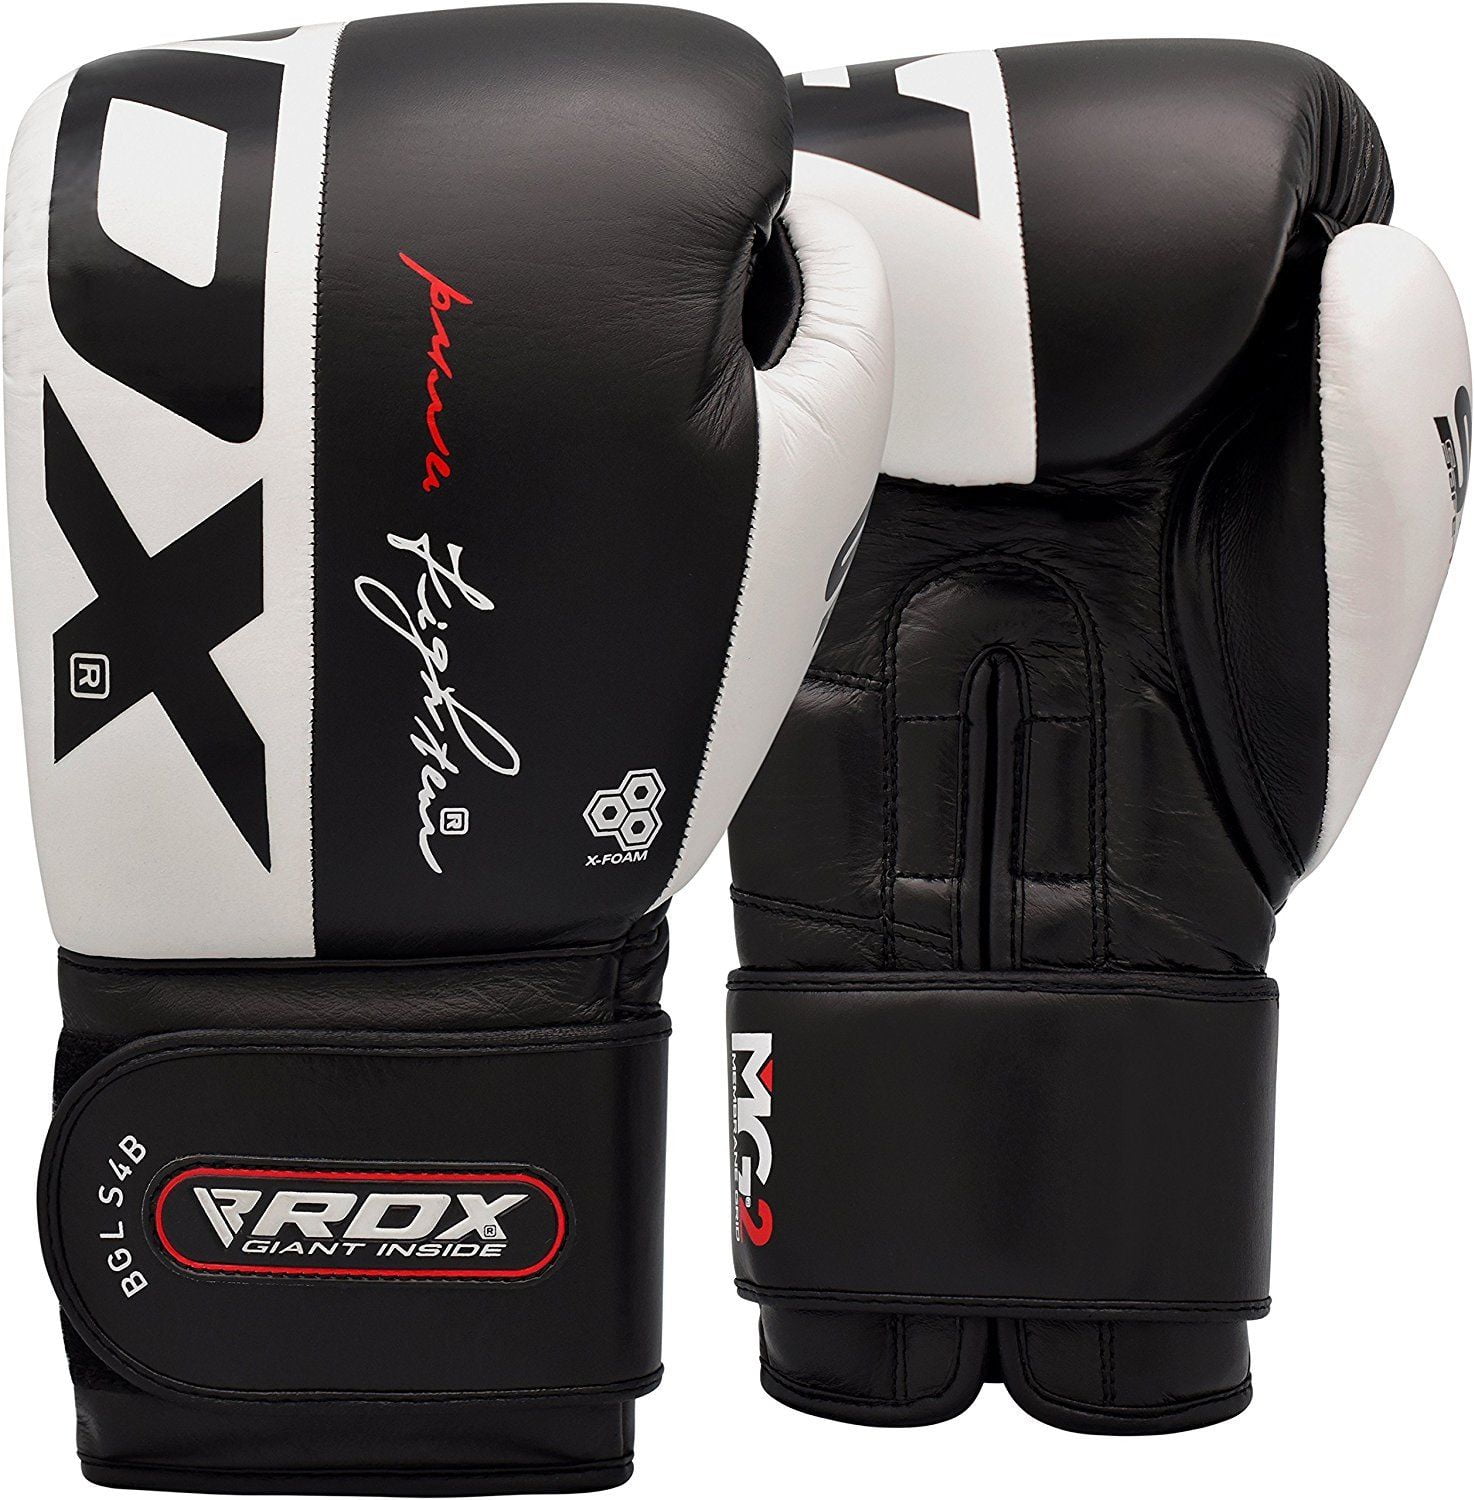 RDX Boxing Gloves Muay Thai Training Sparring Punching Fighting Kickboxing Mitts 